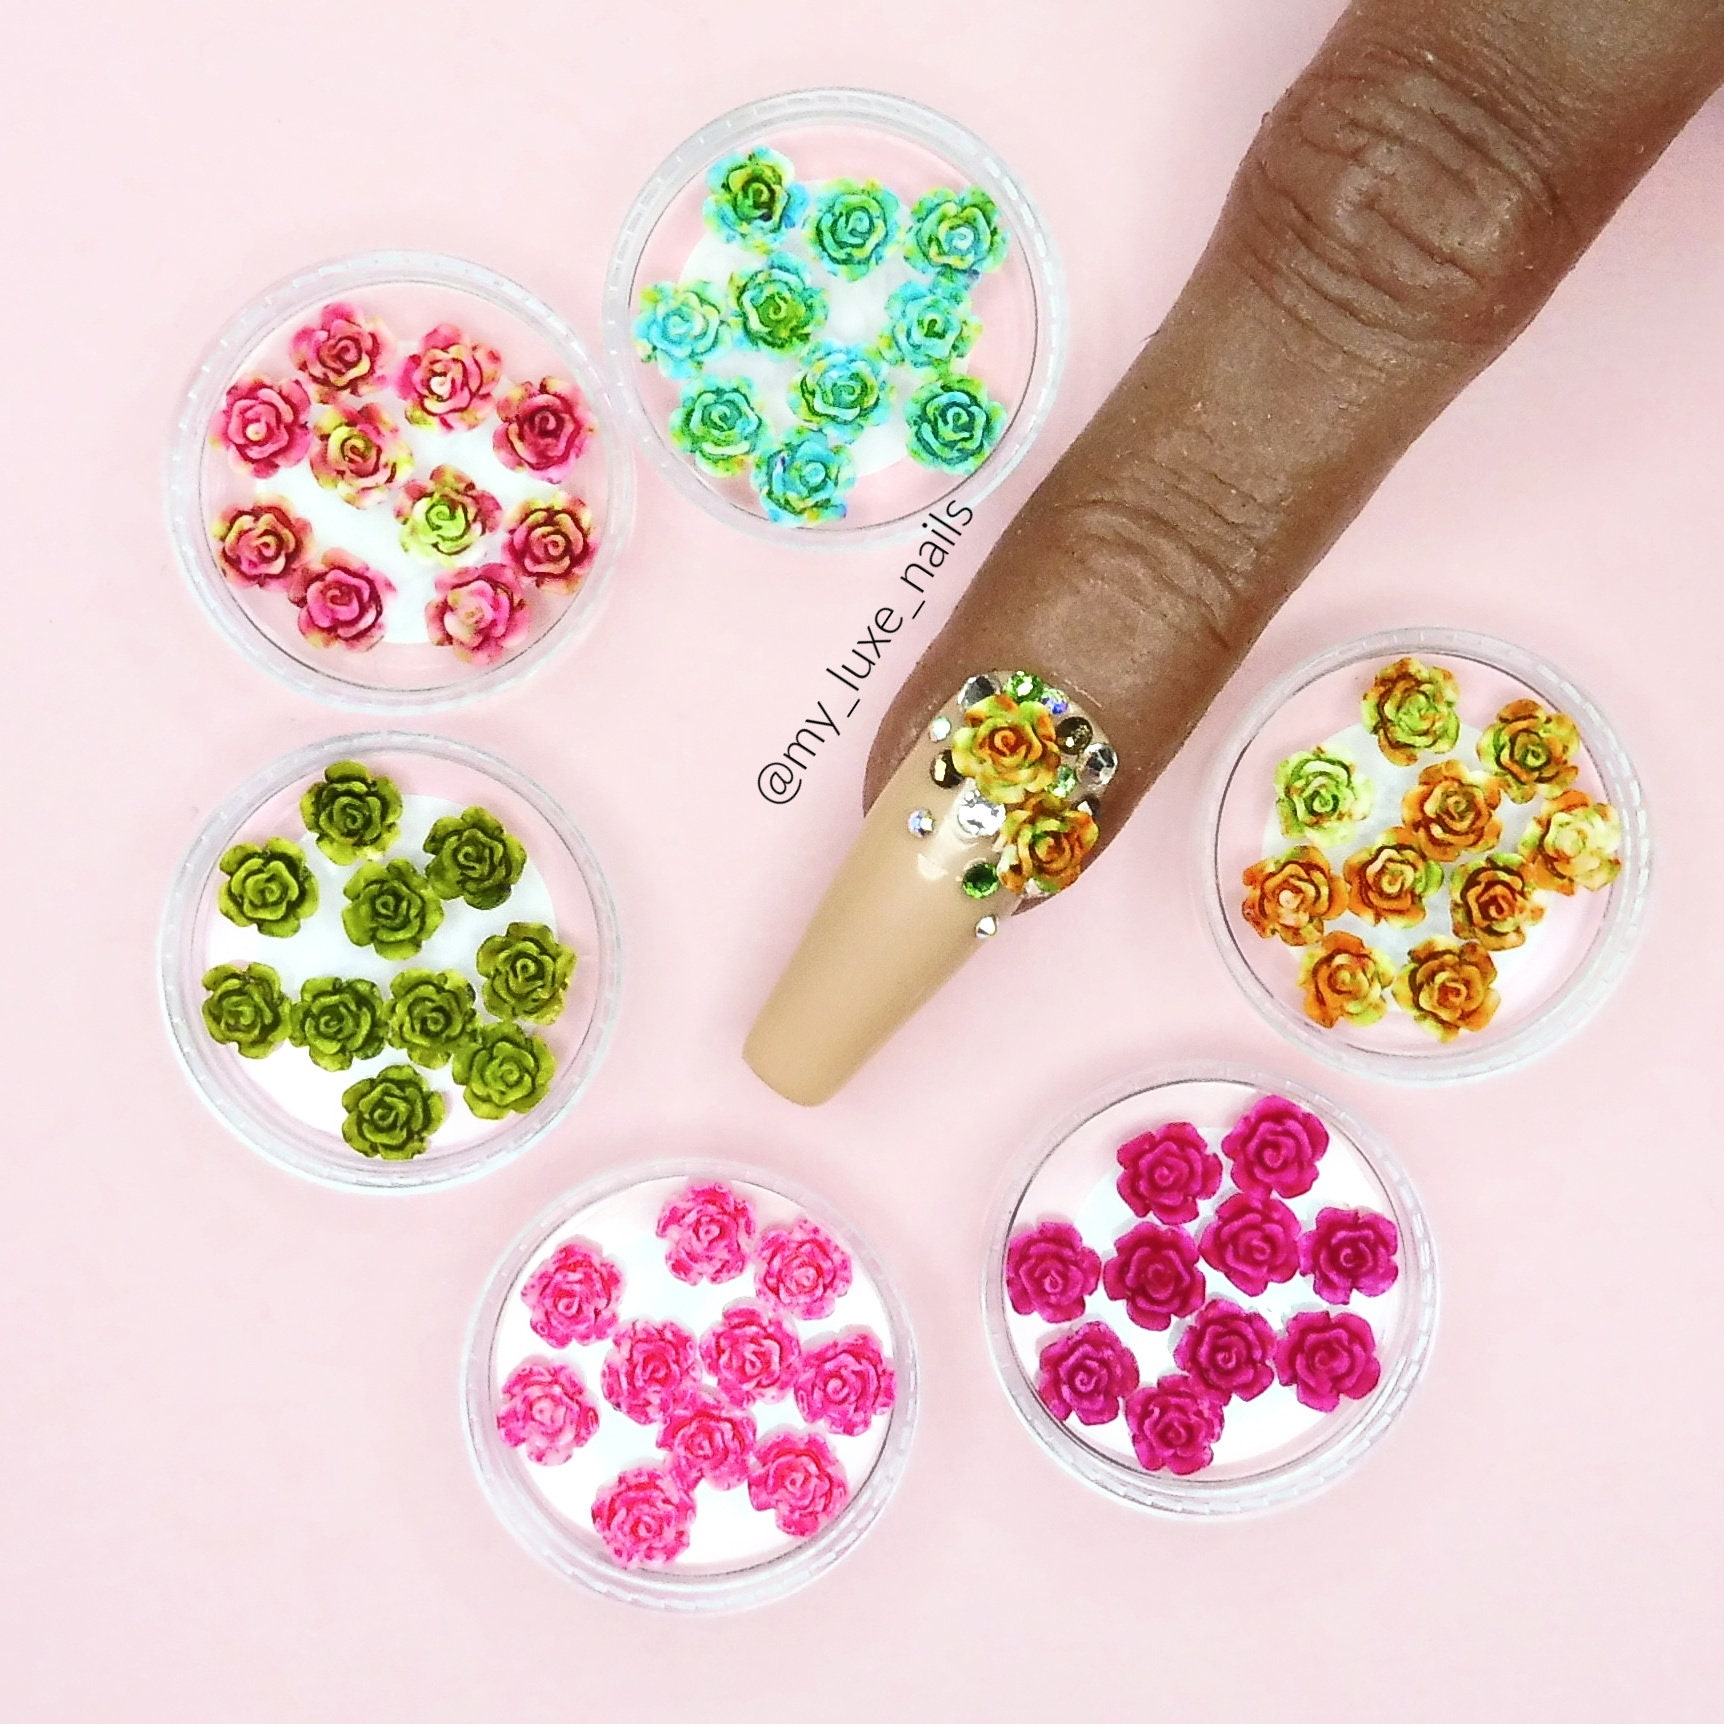 Buy 1000 Pieces Mixed Color Clay 3D Fruits Slices Nail Art Decorations  Perfect for Sticking to Slime, DIY Crafts, Nail Art and Decoration (Fruit)  Online at Low Prices in India - Amazon.in